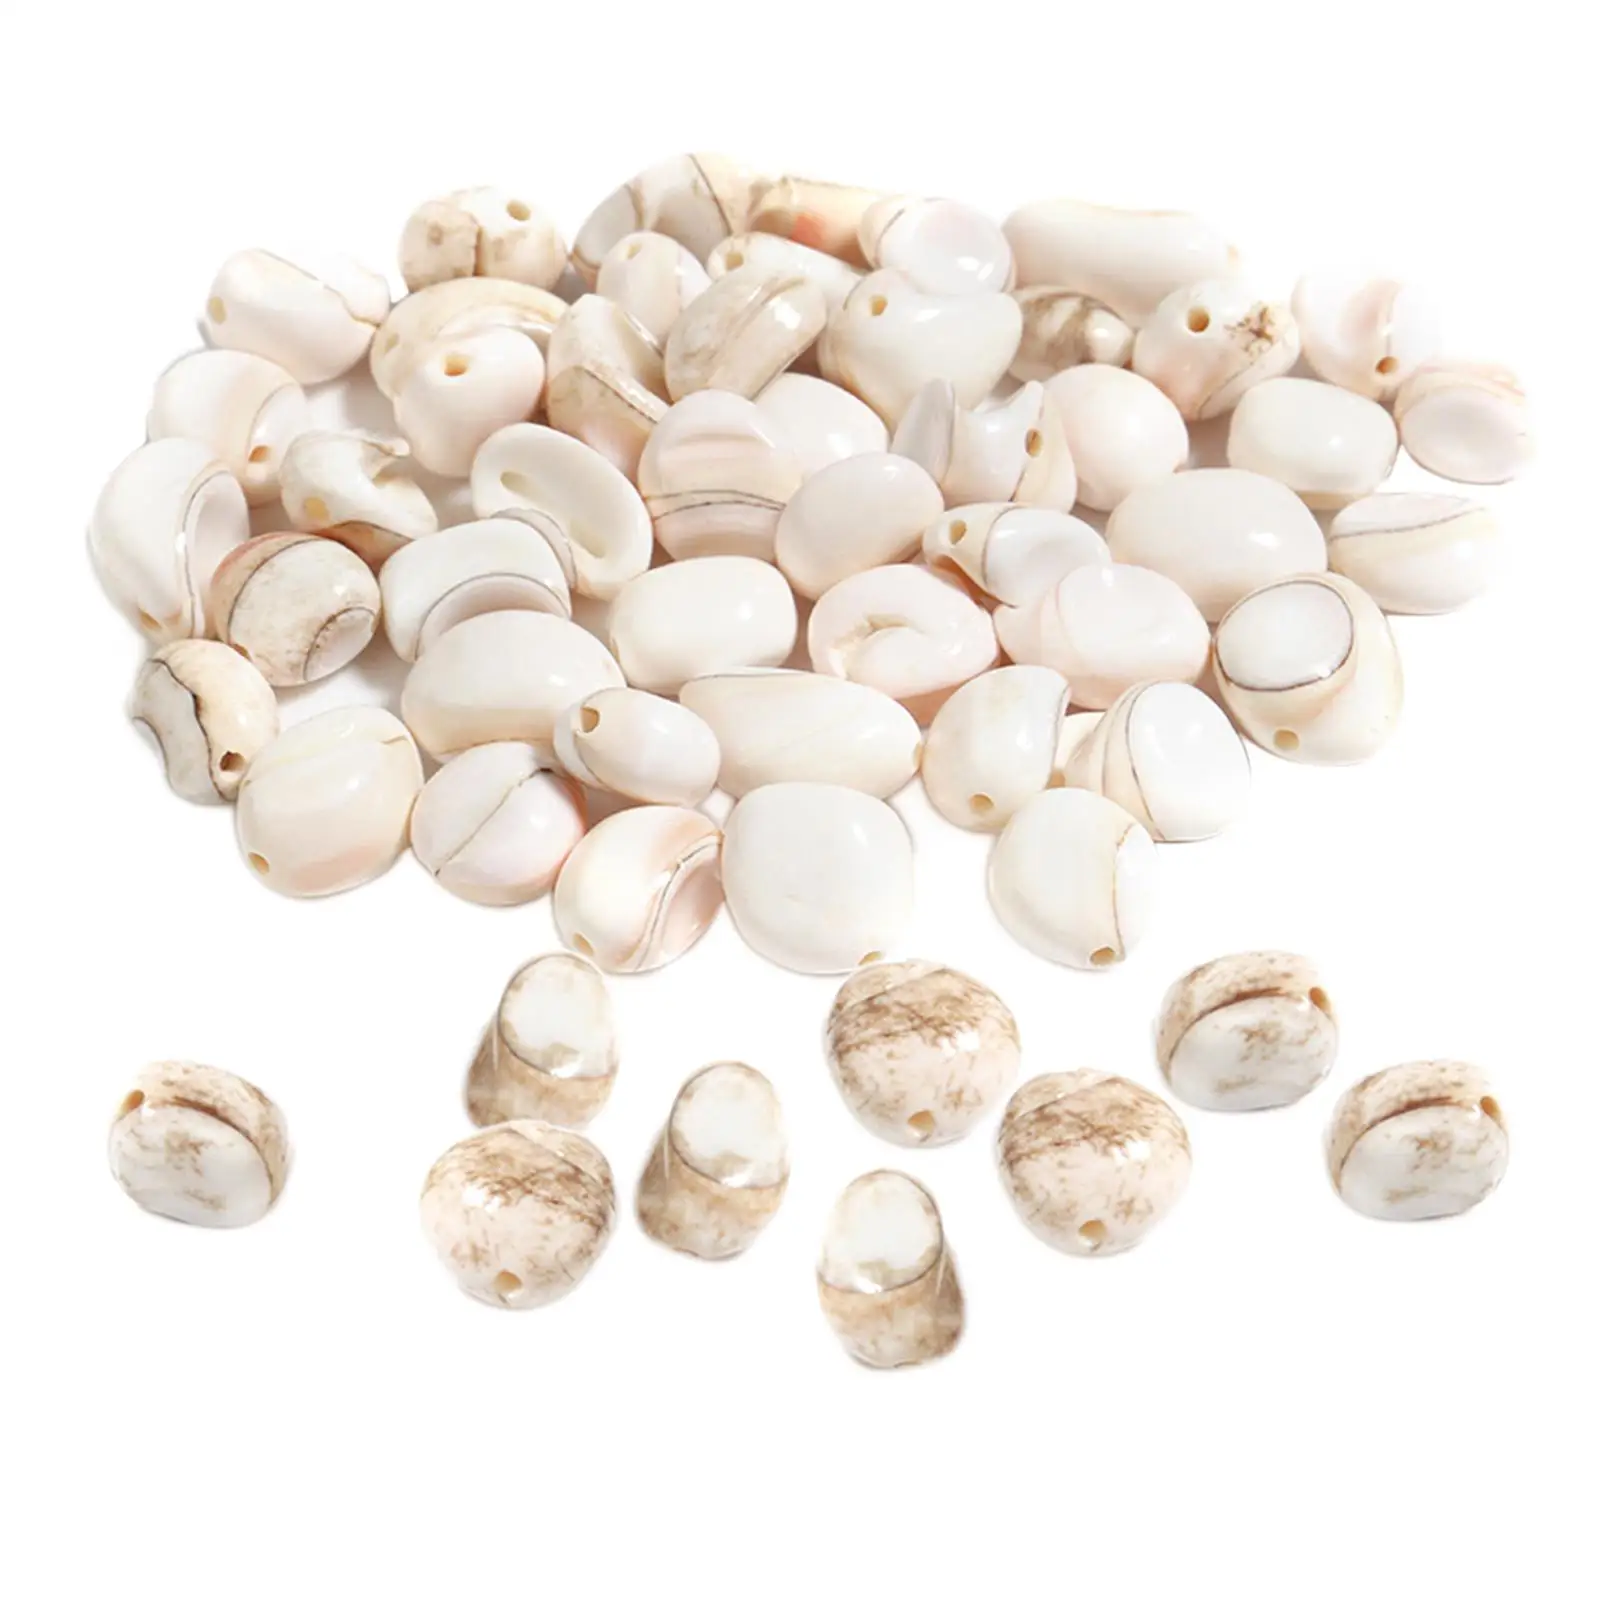 130Pcs Shells Ocean Beach Theme Jewelry Making Supplies for Foot Chains Home Decor Gifts